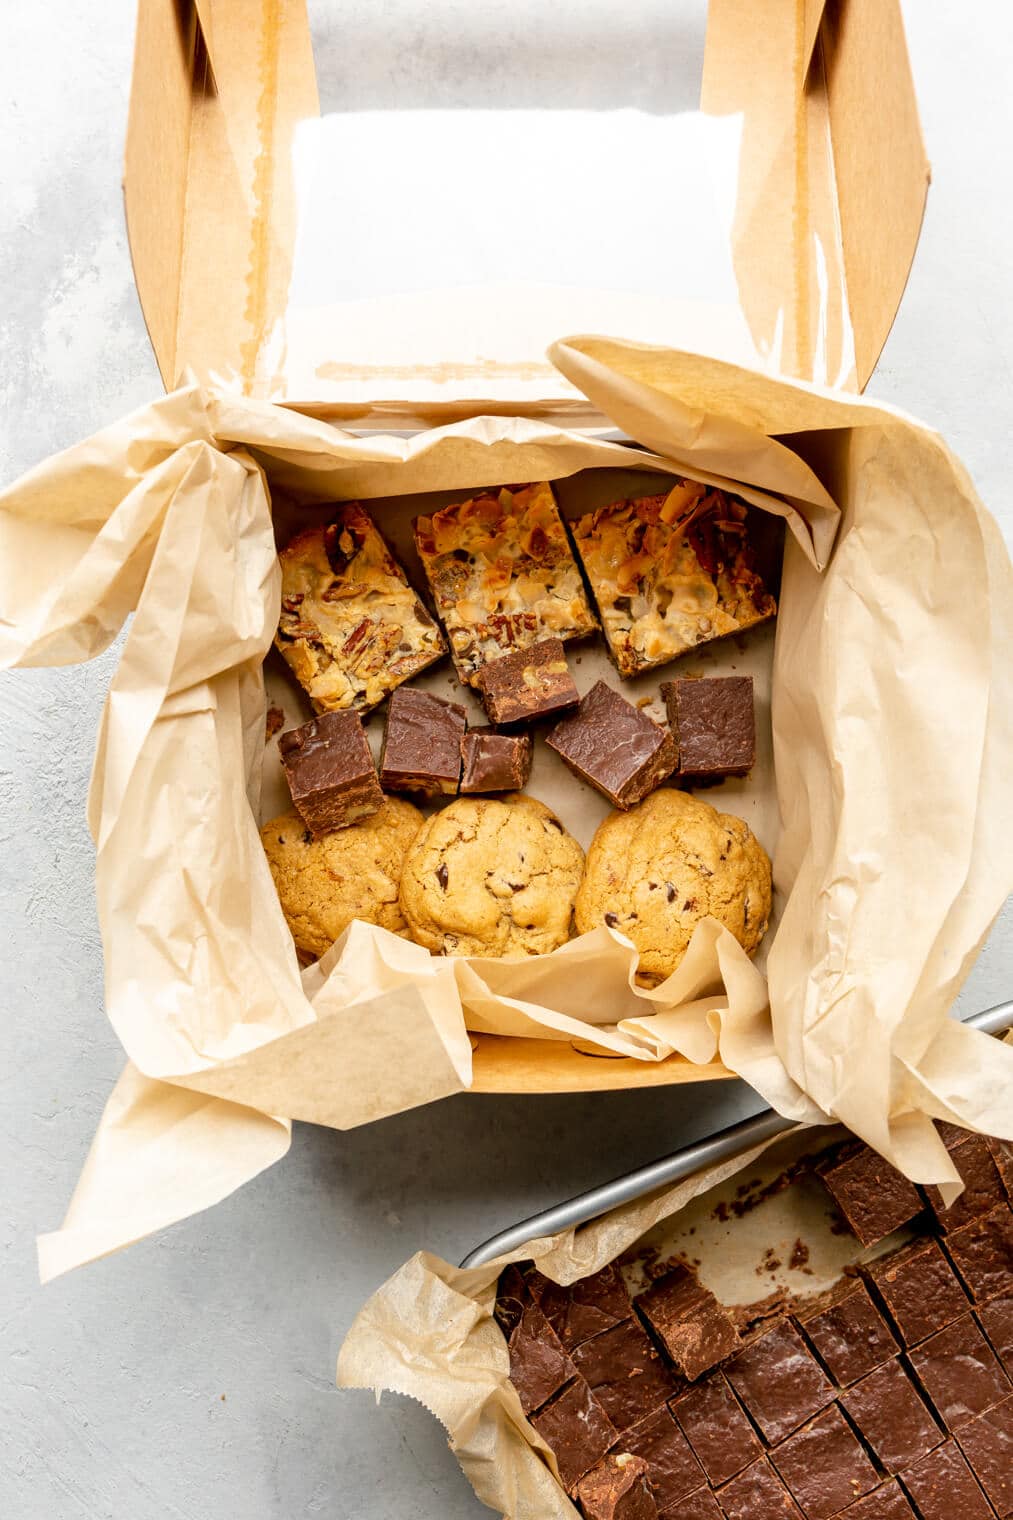 Cookie box lined with parchment paper with rows of cookies, fudge, and bars on the bottom.